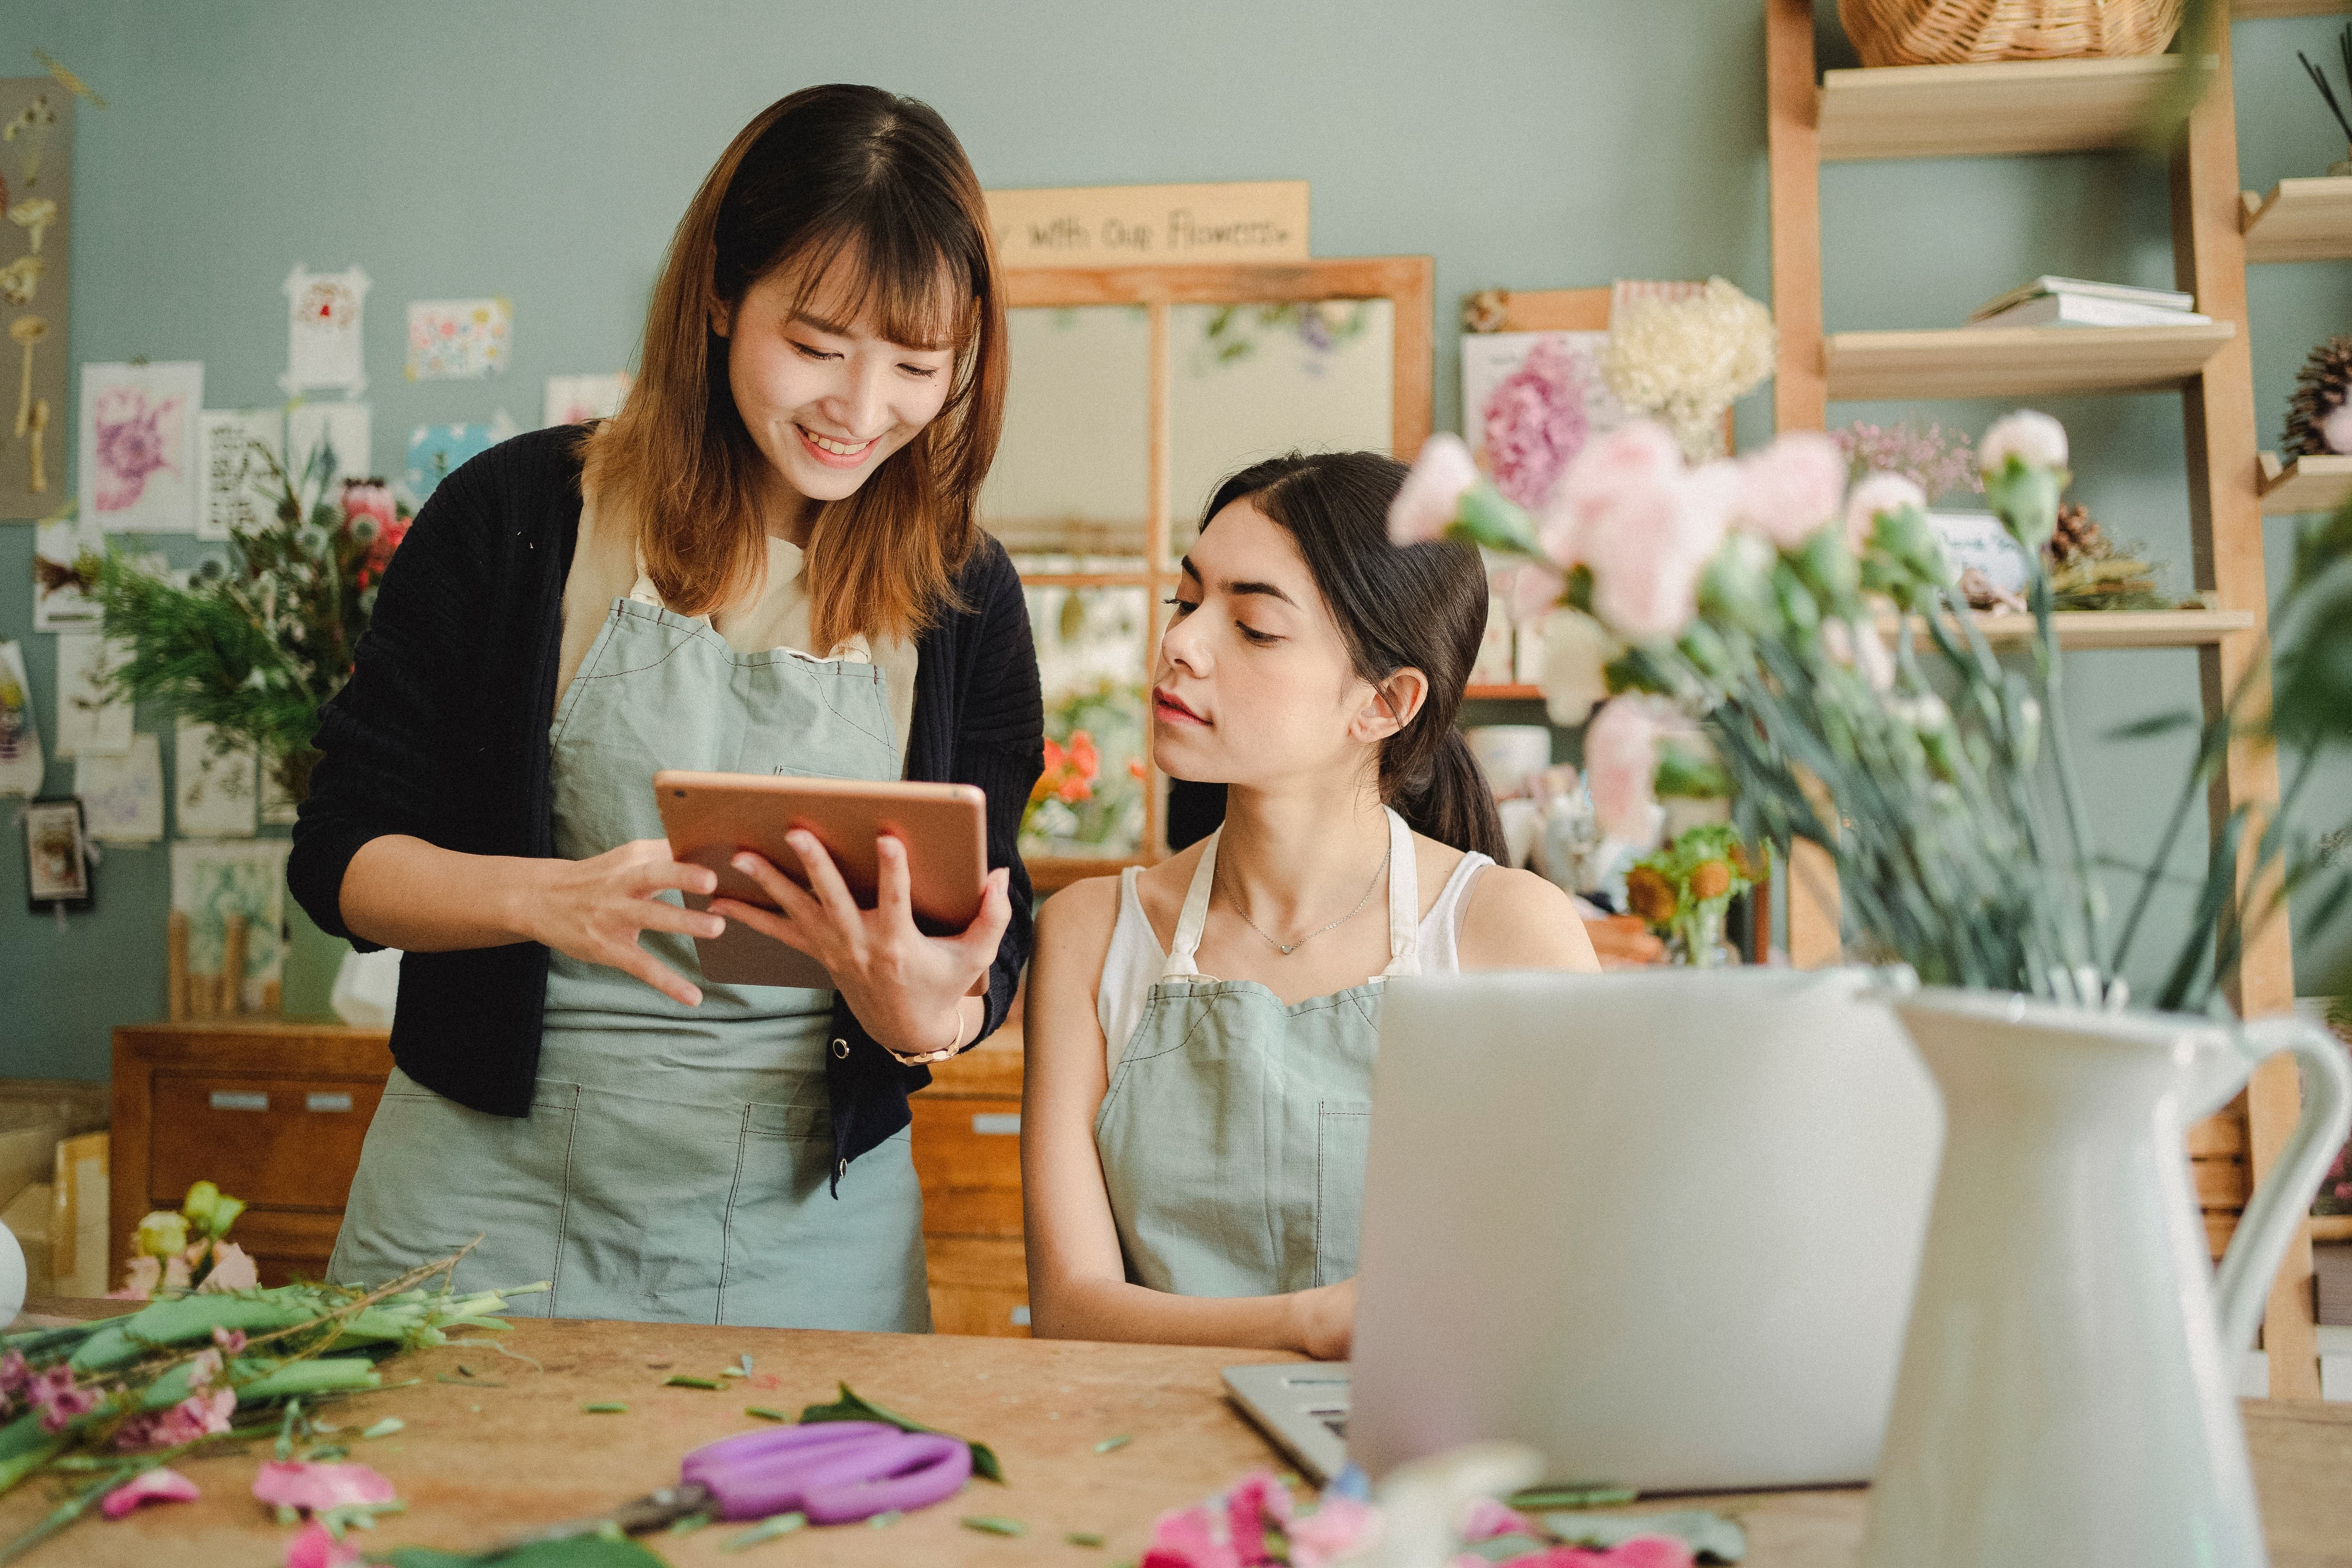 Image of a business owner looking at QuickBooks sales in the flower shop with a team member.